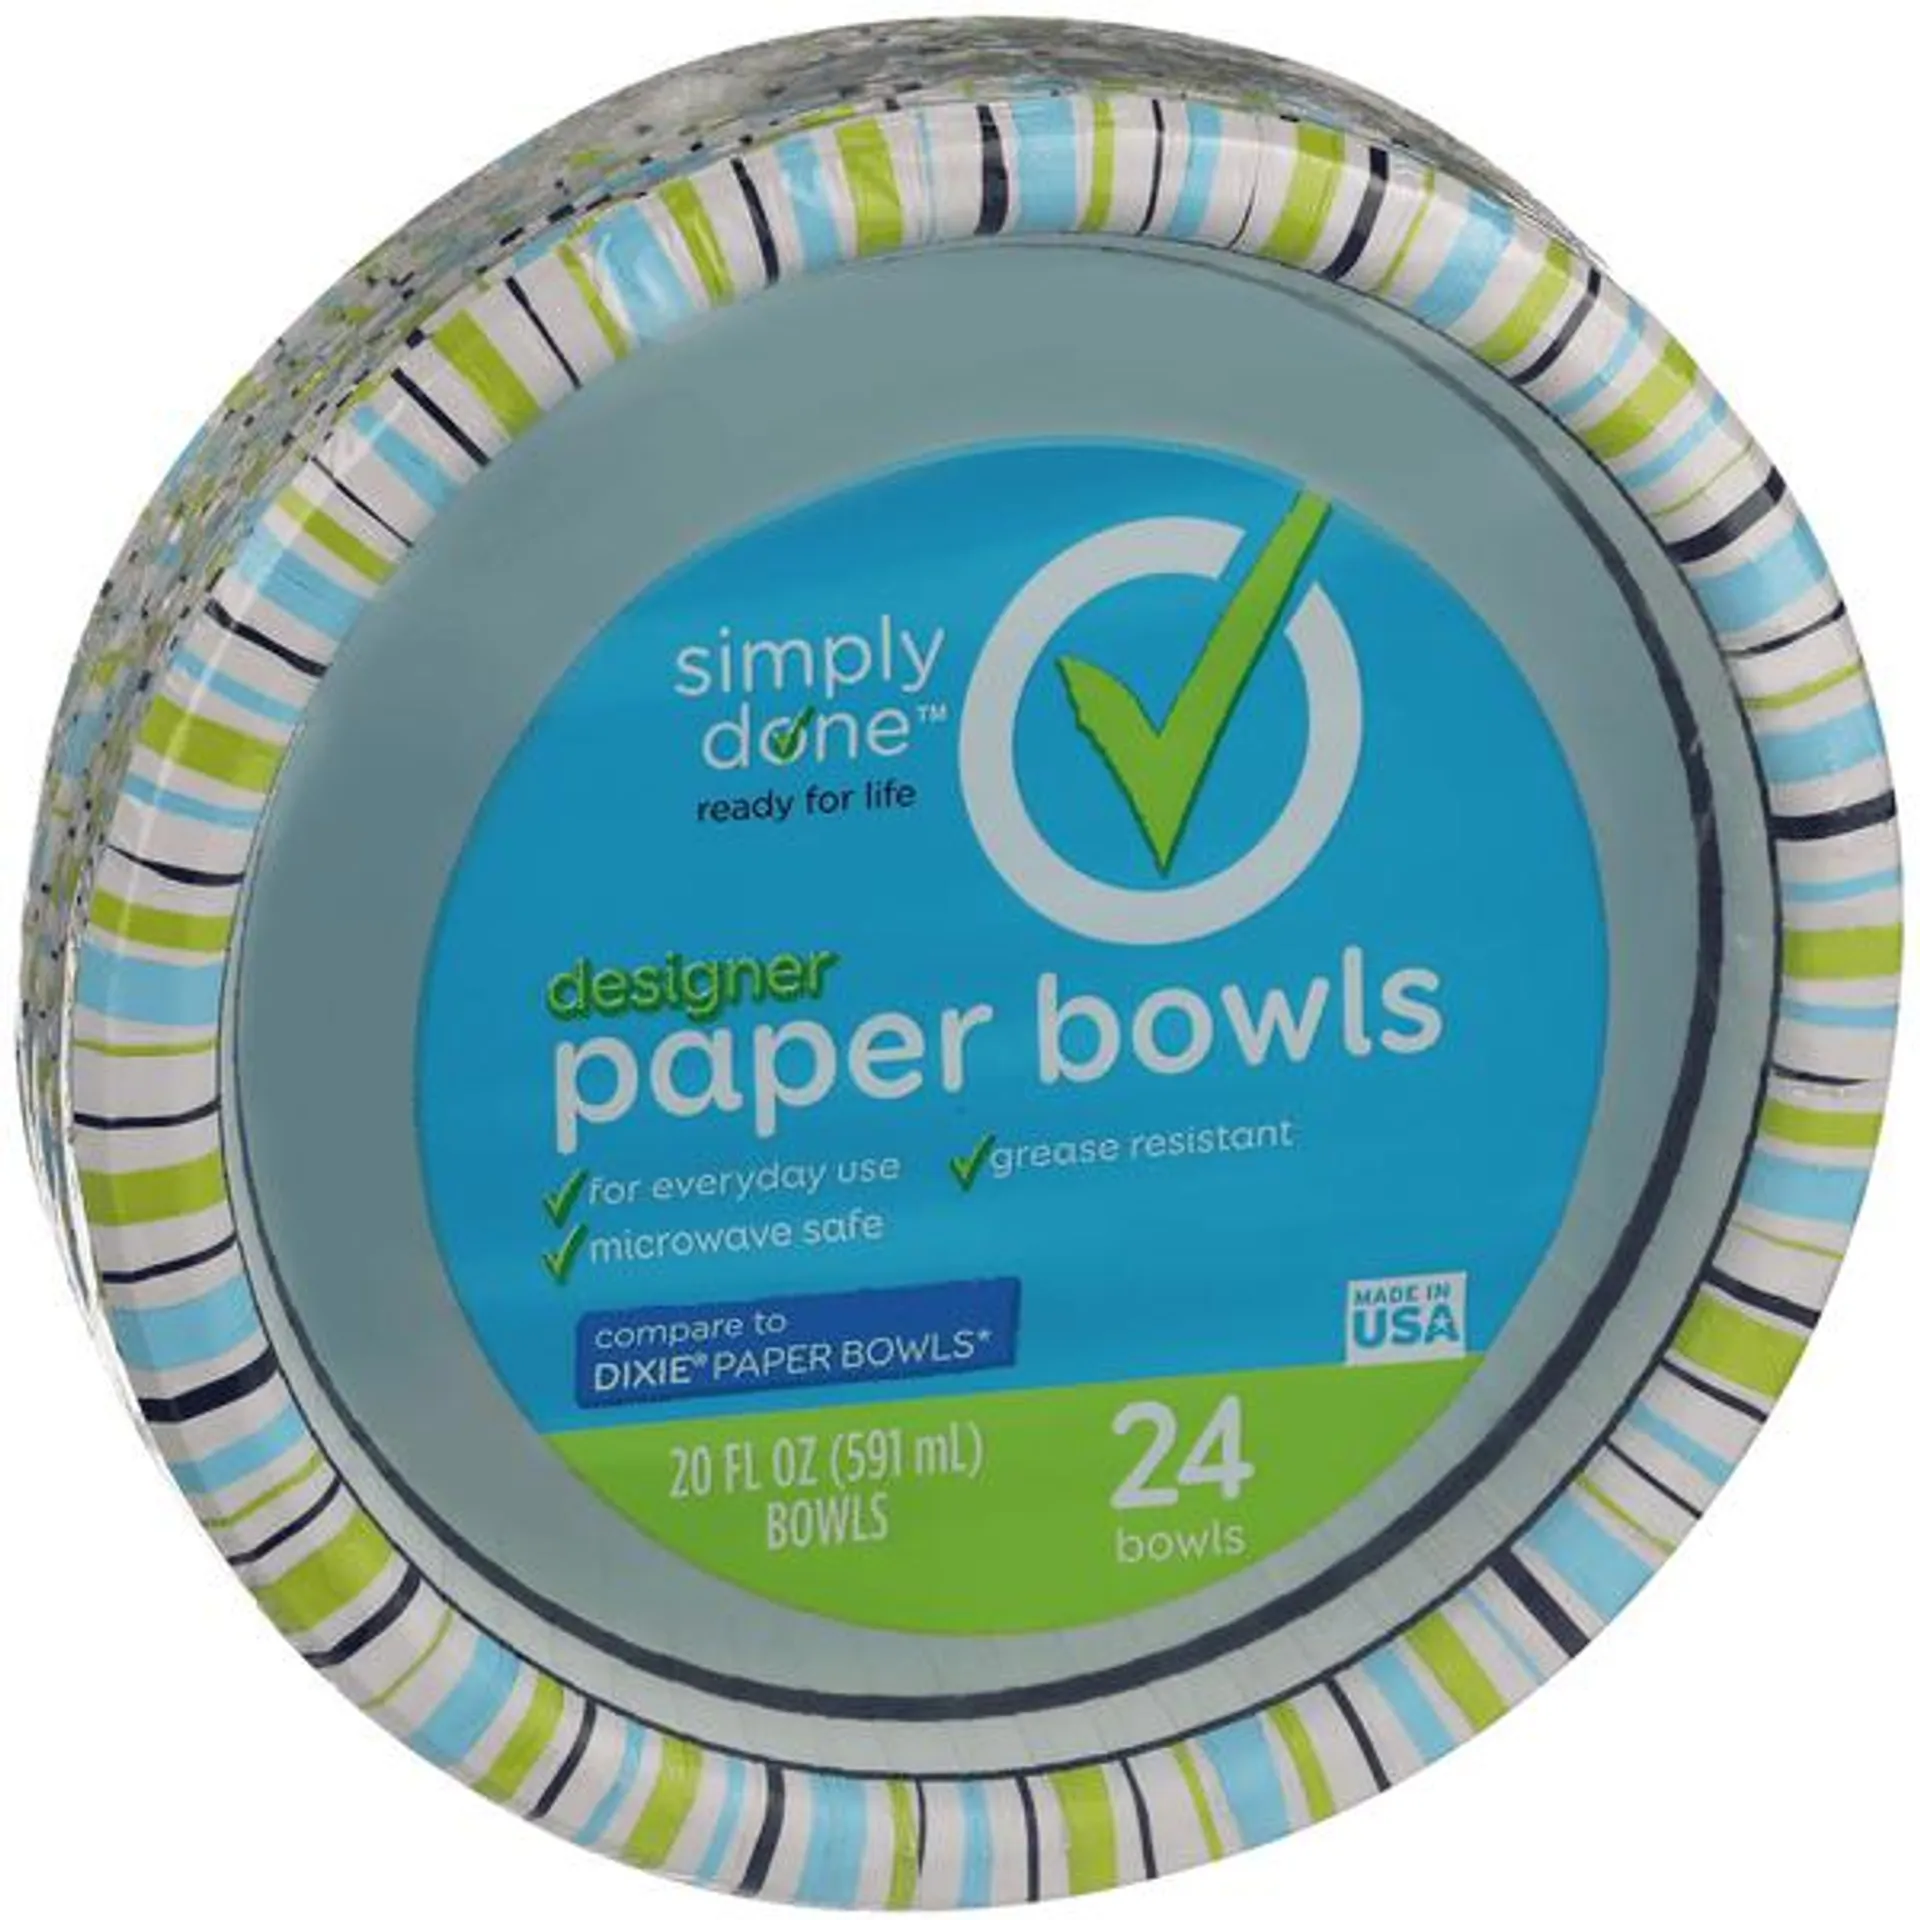 Simply Done Designer Paper Bowls